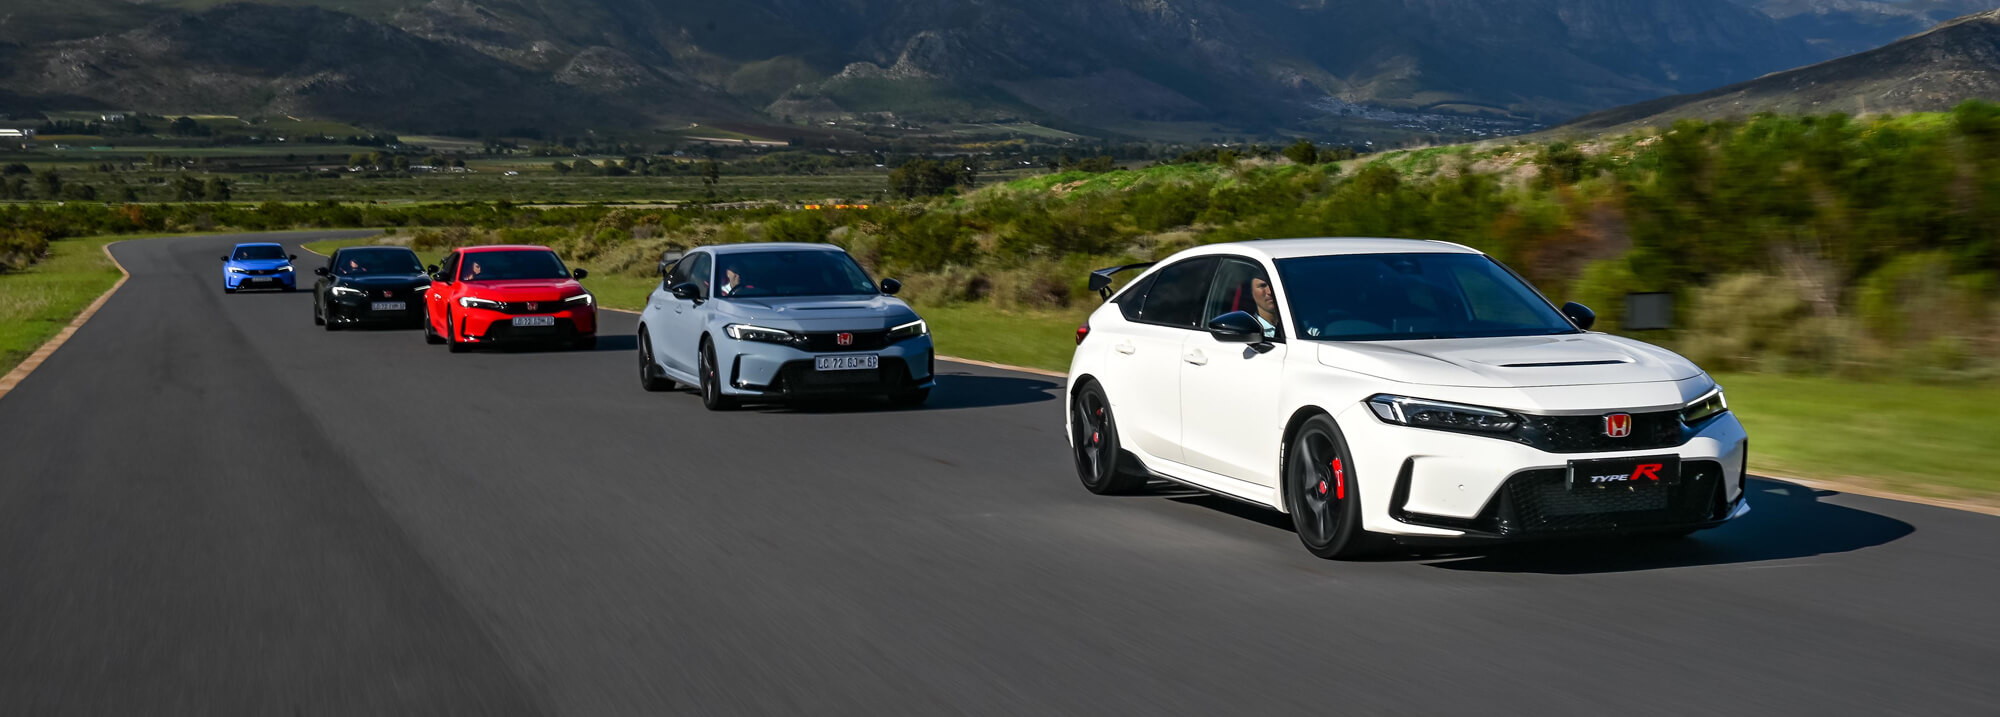 Honda Civic Type R named Performance Car of the year at the 2023 TopGear.com Awards video-banner